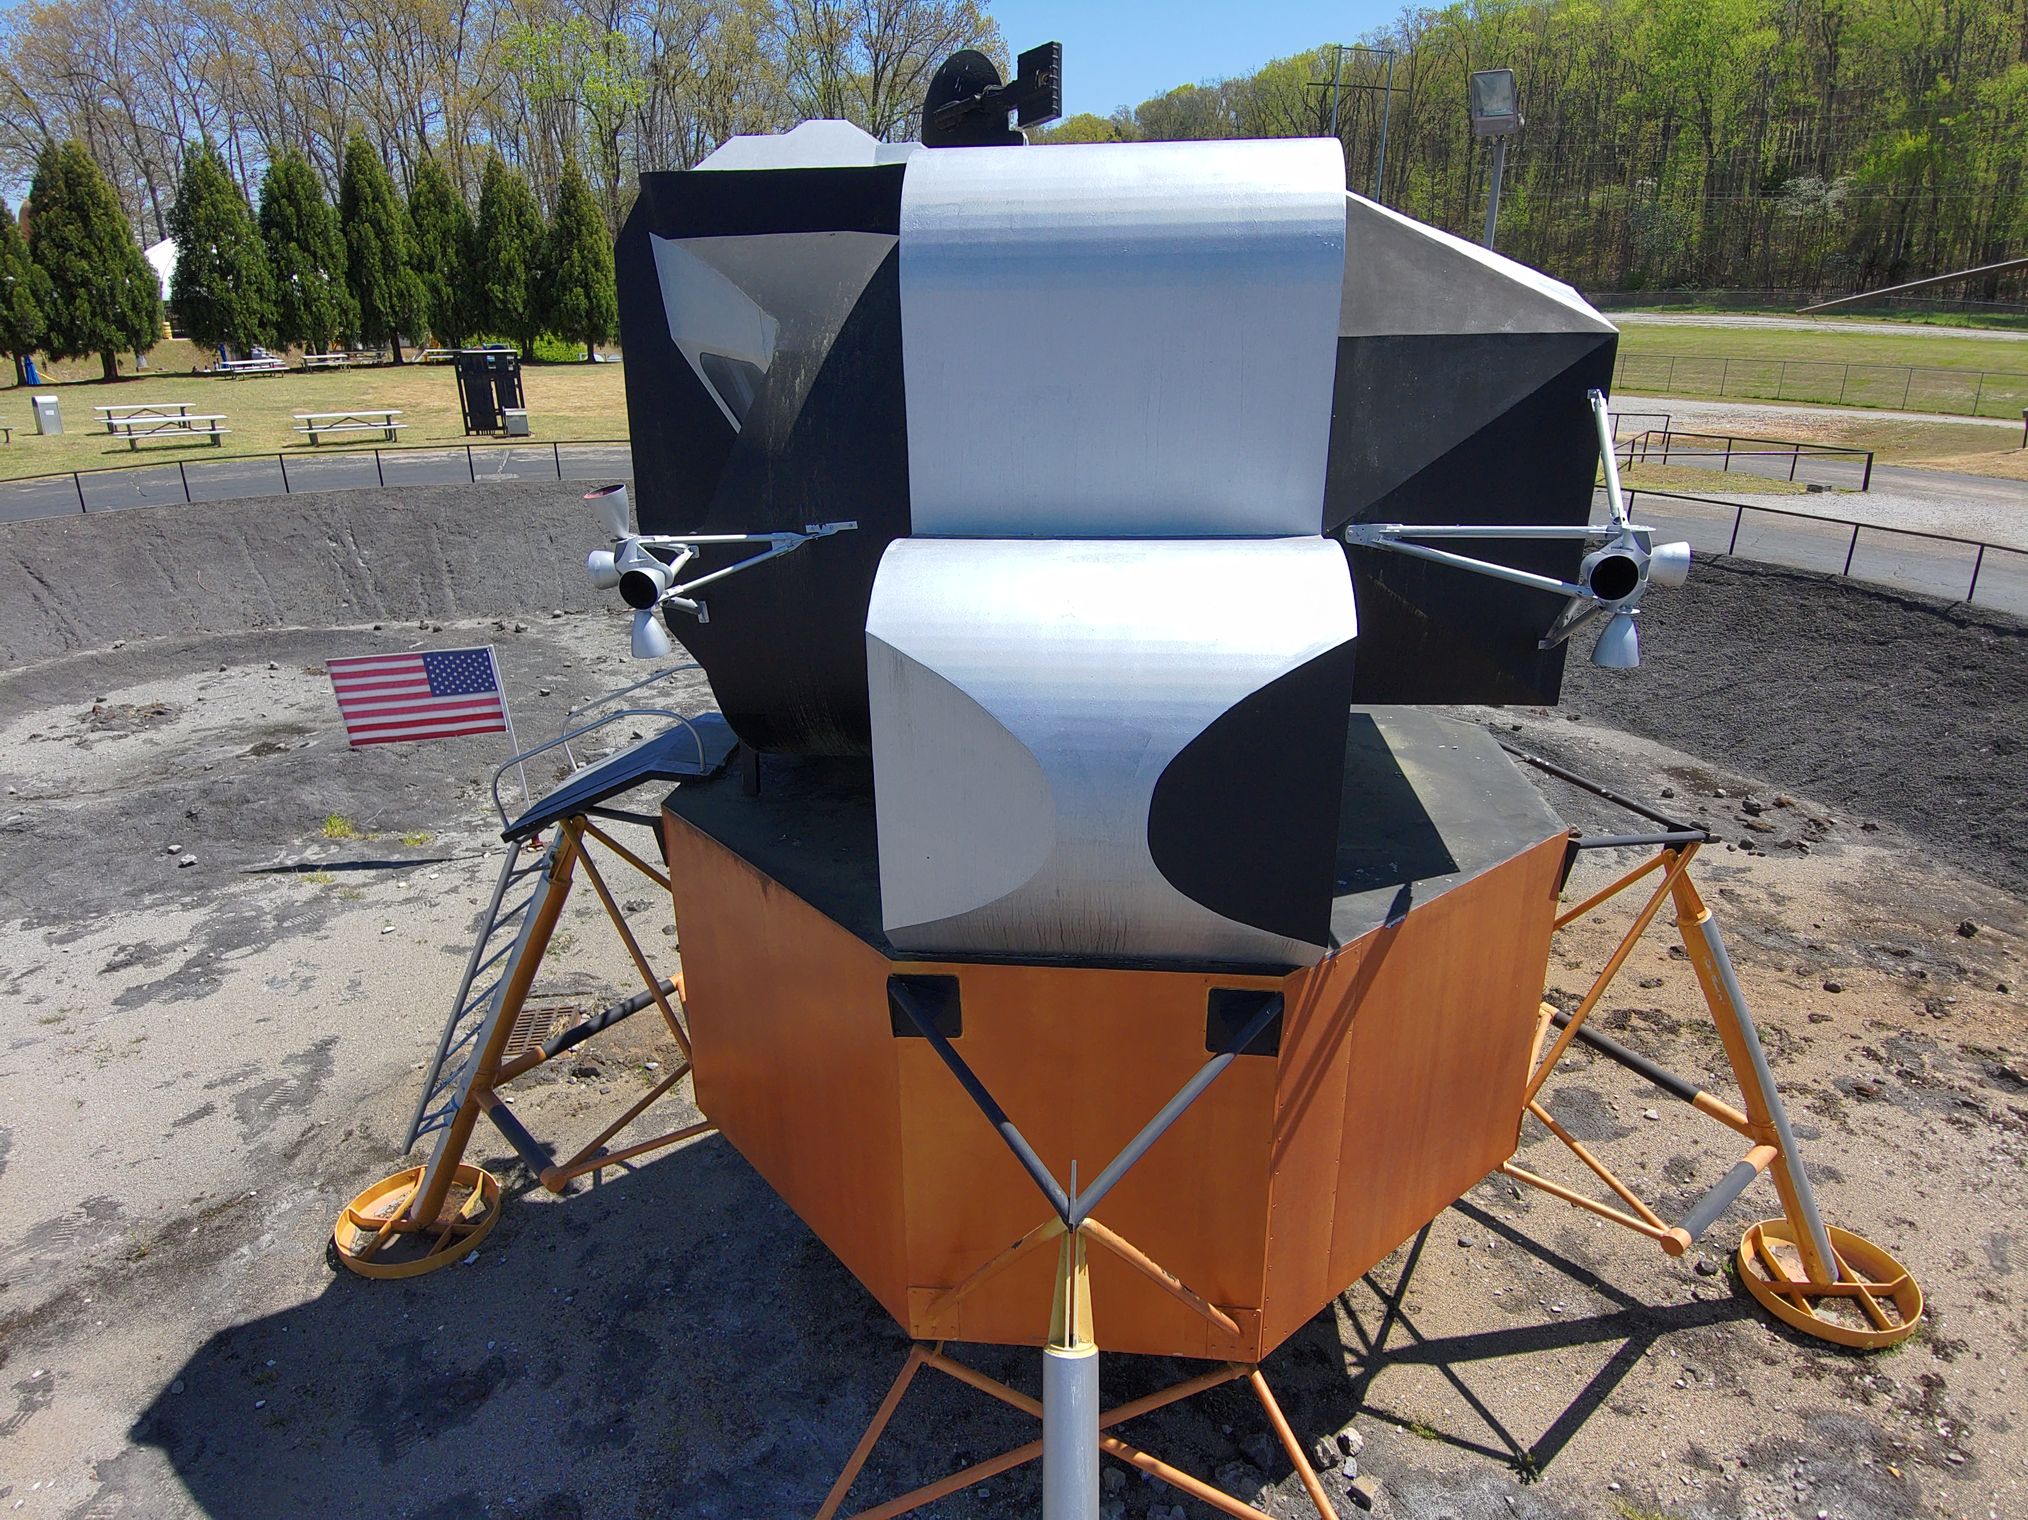 A Drone Photo of the Lunar Lander at the U.S. Space & Rocket Center